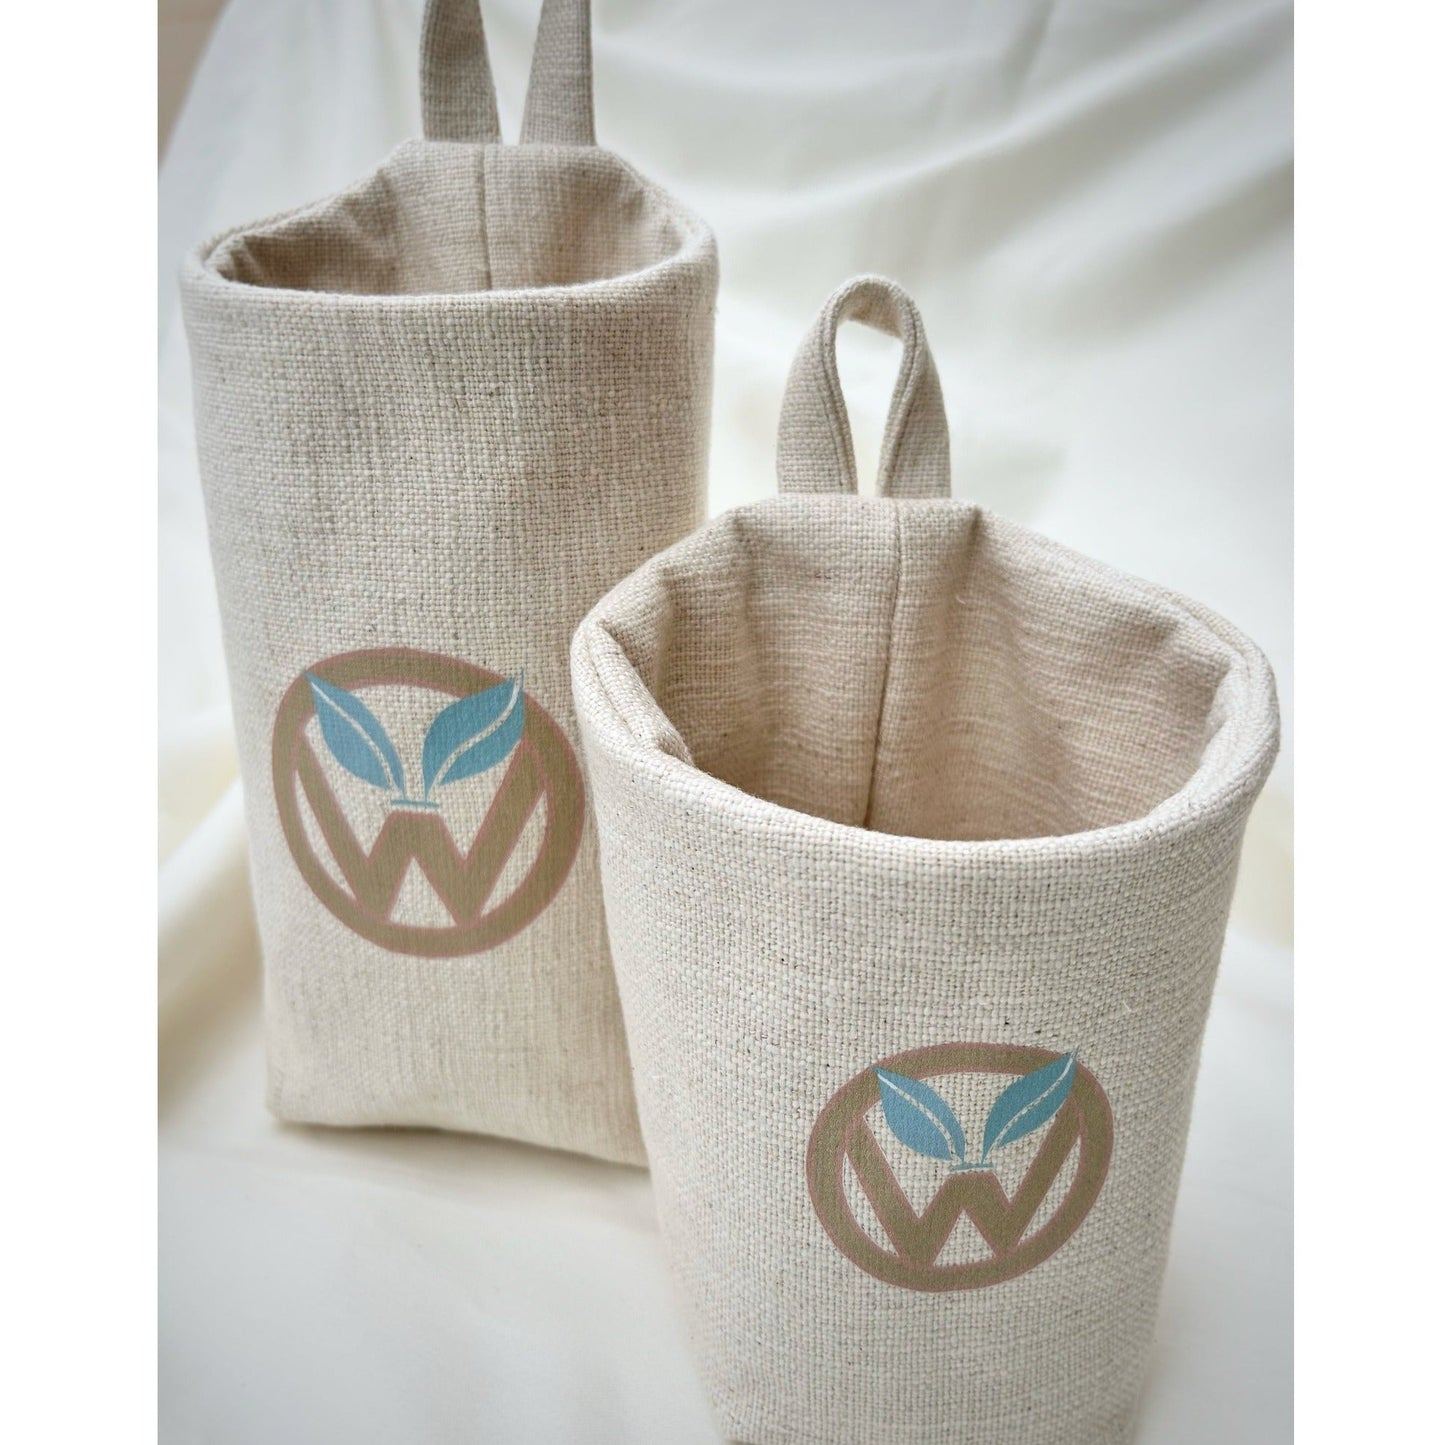 Hanging fabric baskets Natural with VW logo